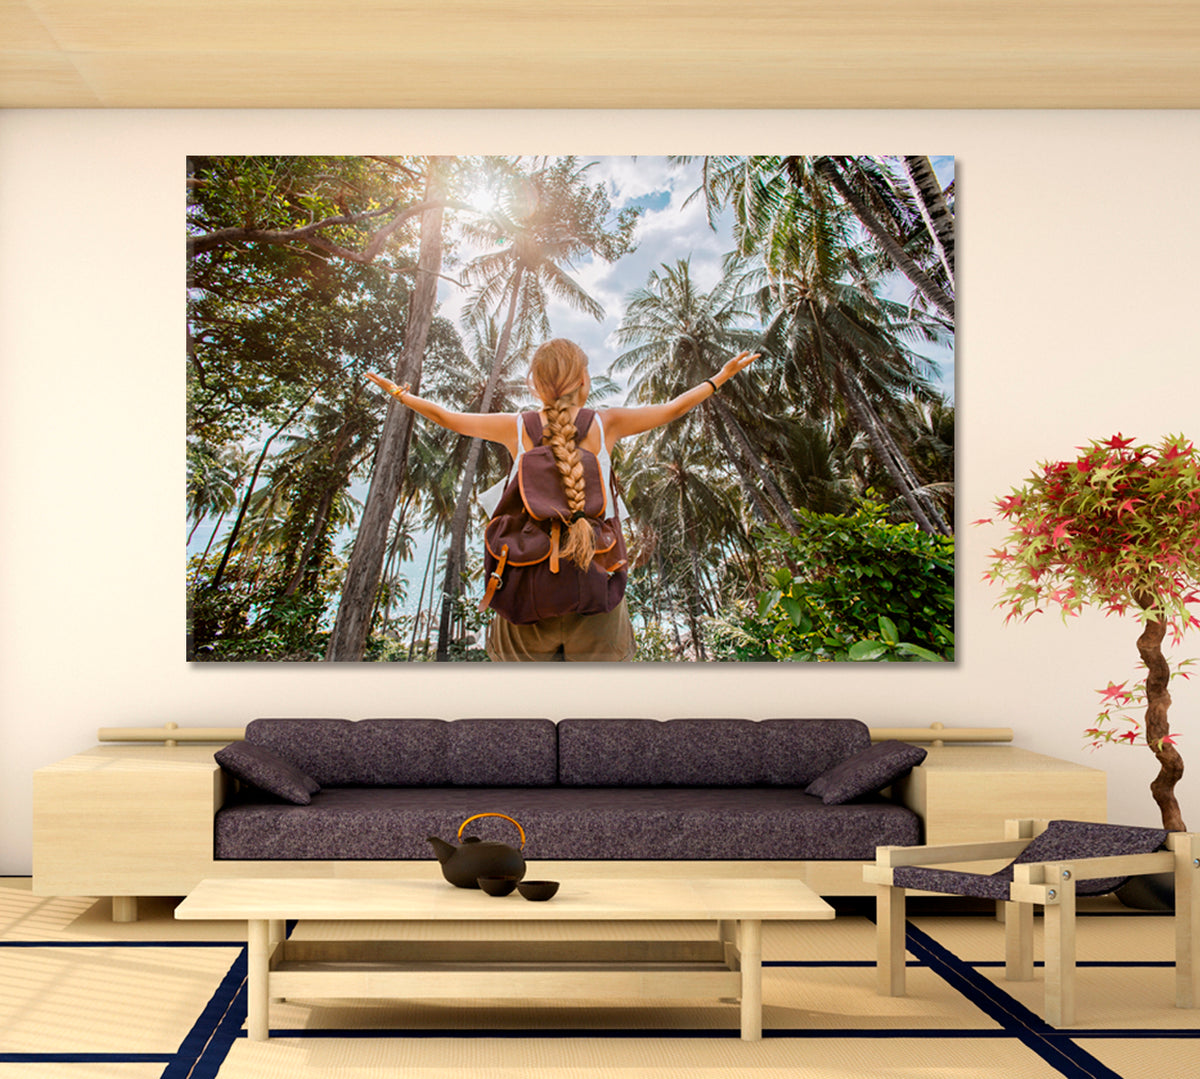 TRAVELING AROUND THE WORLD Girl in the Jungle Sport Active Lifestyle Concept Traveling Around Ink Canvas Print Artesty 1 panel 24" x 16" 